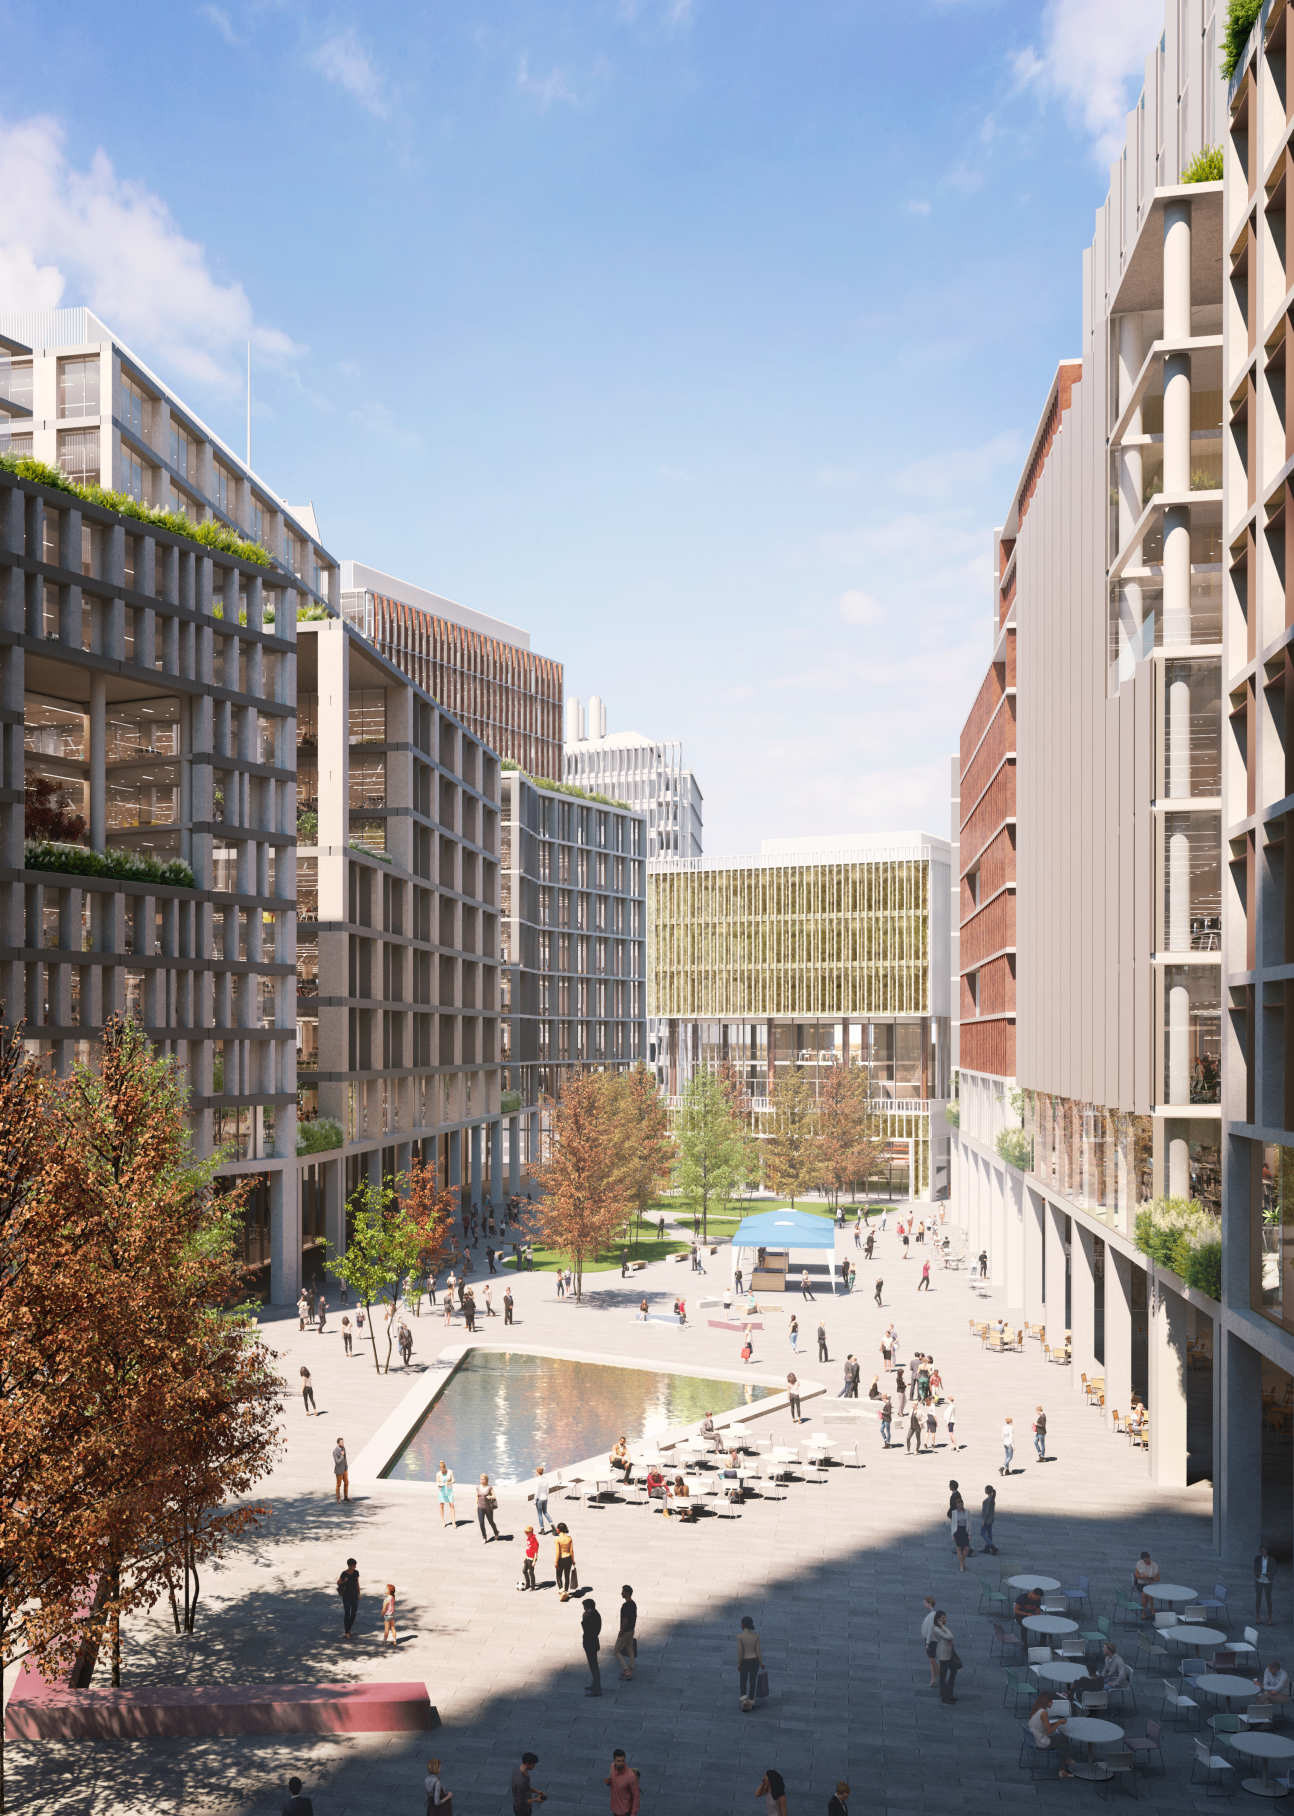 White City plans get green light, Imperial News